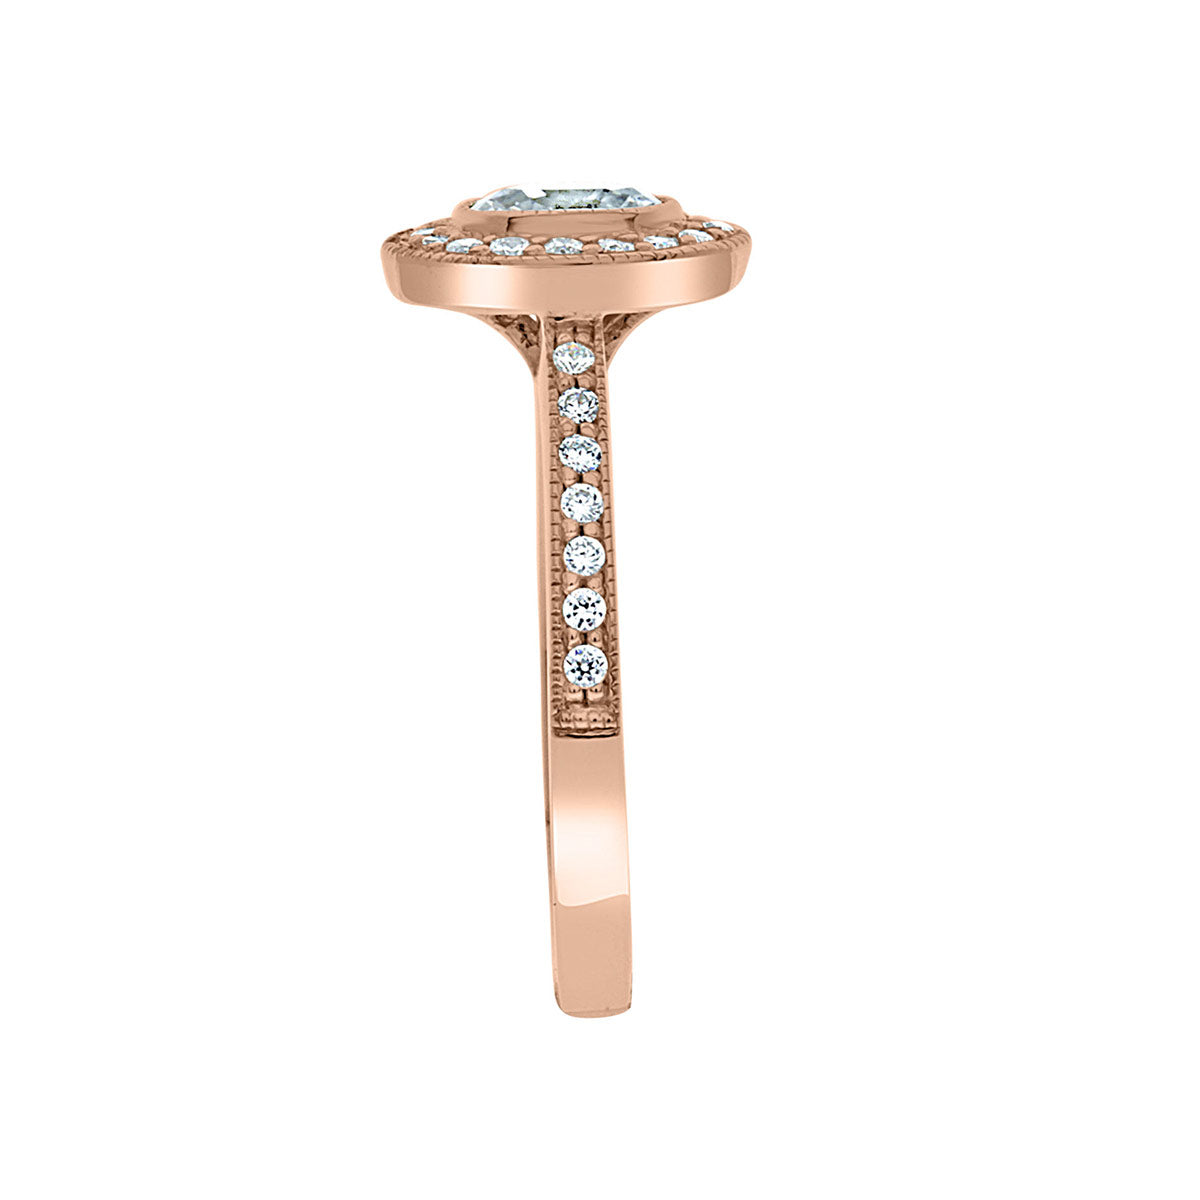 Milgrain Detail Engagement Ring in rose gold pictured in a side view with a white background